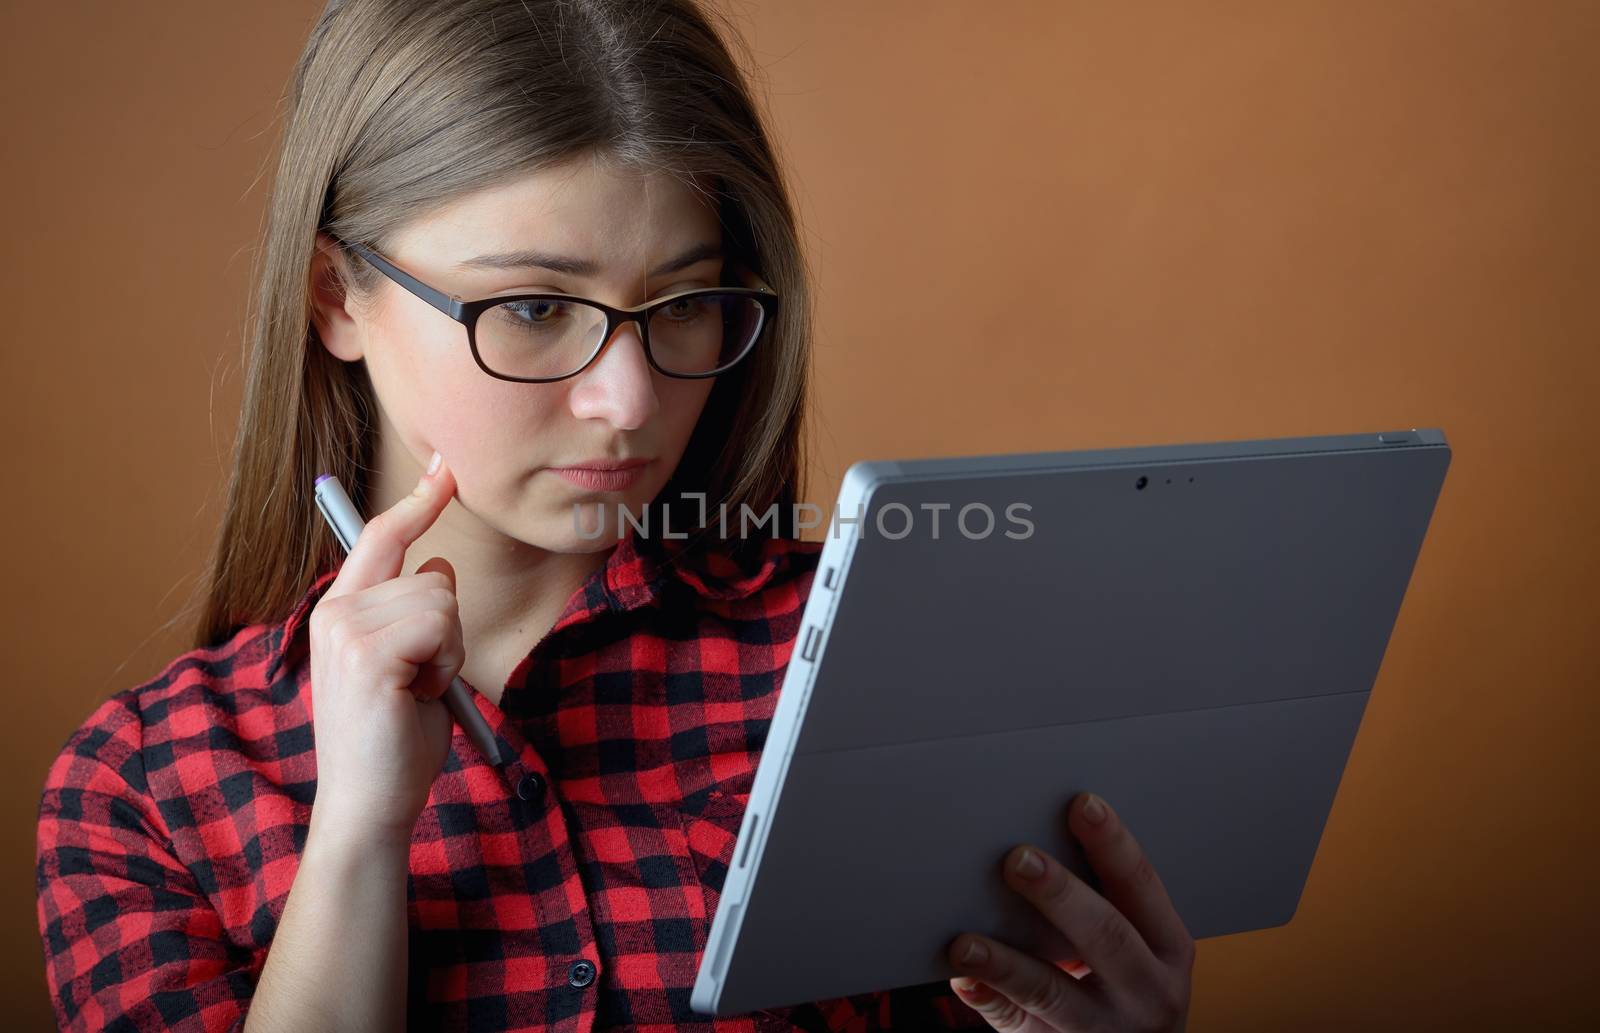 young teenage girl thinking with a tablet